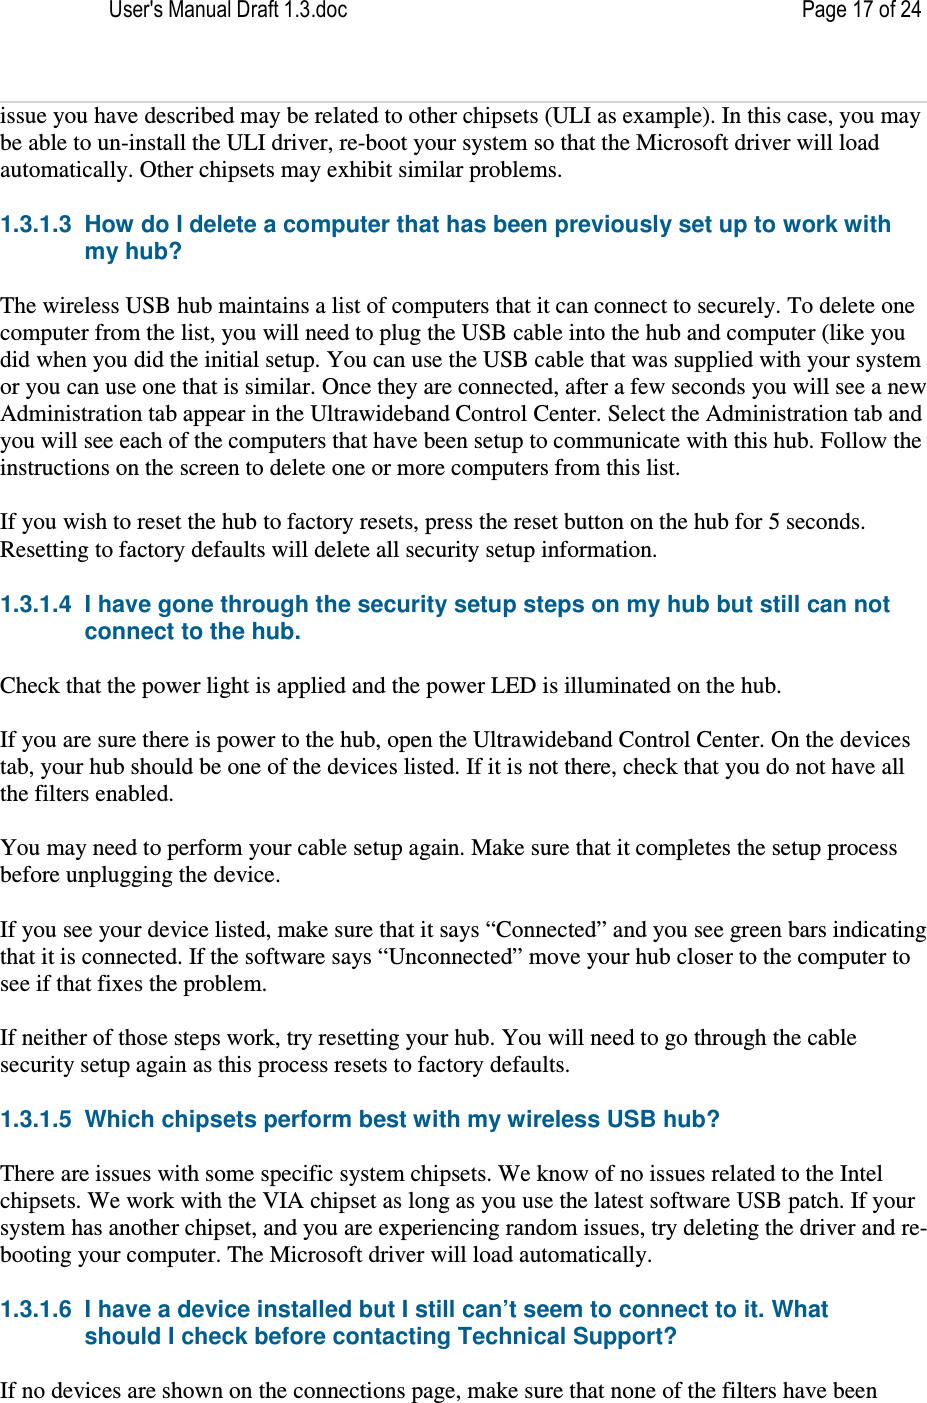 User&apos;s Manual Draft 1.3.doc    Page 17 of 24 issue you have described may be related to other chipsets (ULI as example). In this case, you may be able to un-install the ULI driver, re-boot your system so that the Microsoft driver will load automatically. Other chipsets may exhibit similar problems. 1.3.1.3  How do I delete a computer that has been previously set up to work with my hub? The wireless USB hub maintains a list of computers that it can connect to securely. To delete one computer from the list, you will need to plug the USB cable into the hub and computer (like you did when you did the initial setup. You can use the USB cable that was supplied with your system or you can use one that is similar. Once they are connected, after a few seconds you will see a new Administration tab appear in the Ultrawideband Control Center. Select the Administration tab and you will see each of the computers that have been setup to communicate with this hub. Follow the instructions on the screen to delete one or more computers from this list.  If you wish to reset the hub to factory resets, press the reset button on the hub for 5 seconds. Resetting to factory defaults will delete all security setup information.  1.3.1.4  I have gone through the security setup steps on my hub but still can not connect to the hub. Check that the power light is applied and the power LED is illuminated on the hub.  If you are sure there is power to the hub, open the Ultrawideband Control Center. On the devices tab, your hub should be one of the devices listed. If it is not there, check that you do not have all the filters enabled.  You may need to perform your cable setup again. Make sure that it completes the setup process before unplugging the device.  If you see your device listed, make sure that it says “Connected” and you see green bars indicating that it is connected. If the software says “Unconnected” move your hub closer to the computer to see if that fixes the problem.  If neither of those steps work, try resetting your hub. You will need to go through the cable security setup again as this process resets to factory defaults.  1.3.1.5  Which chipsets perform best with my wireless USB hub? There are issues with some specific system chipsets. We know of no issues related to the Intel chipsets. We work with the VIA chipset as long as you use the latest software USB patch. If your system has another chipset, and you are experiencing random issues, try deleting the driver and re-booting your computer. The Microsoft driver will load automatically.  1.3.1.6  I have a device installed but I still can’t seem to connect to it. What should I check before contacting Technical Support? If no devices are shown on the connections page, make sure that none of the filters have been 